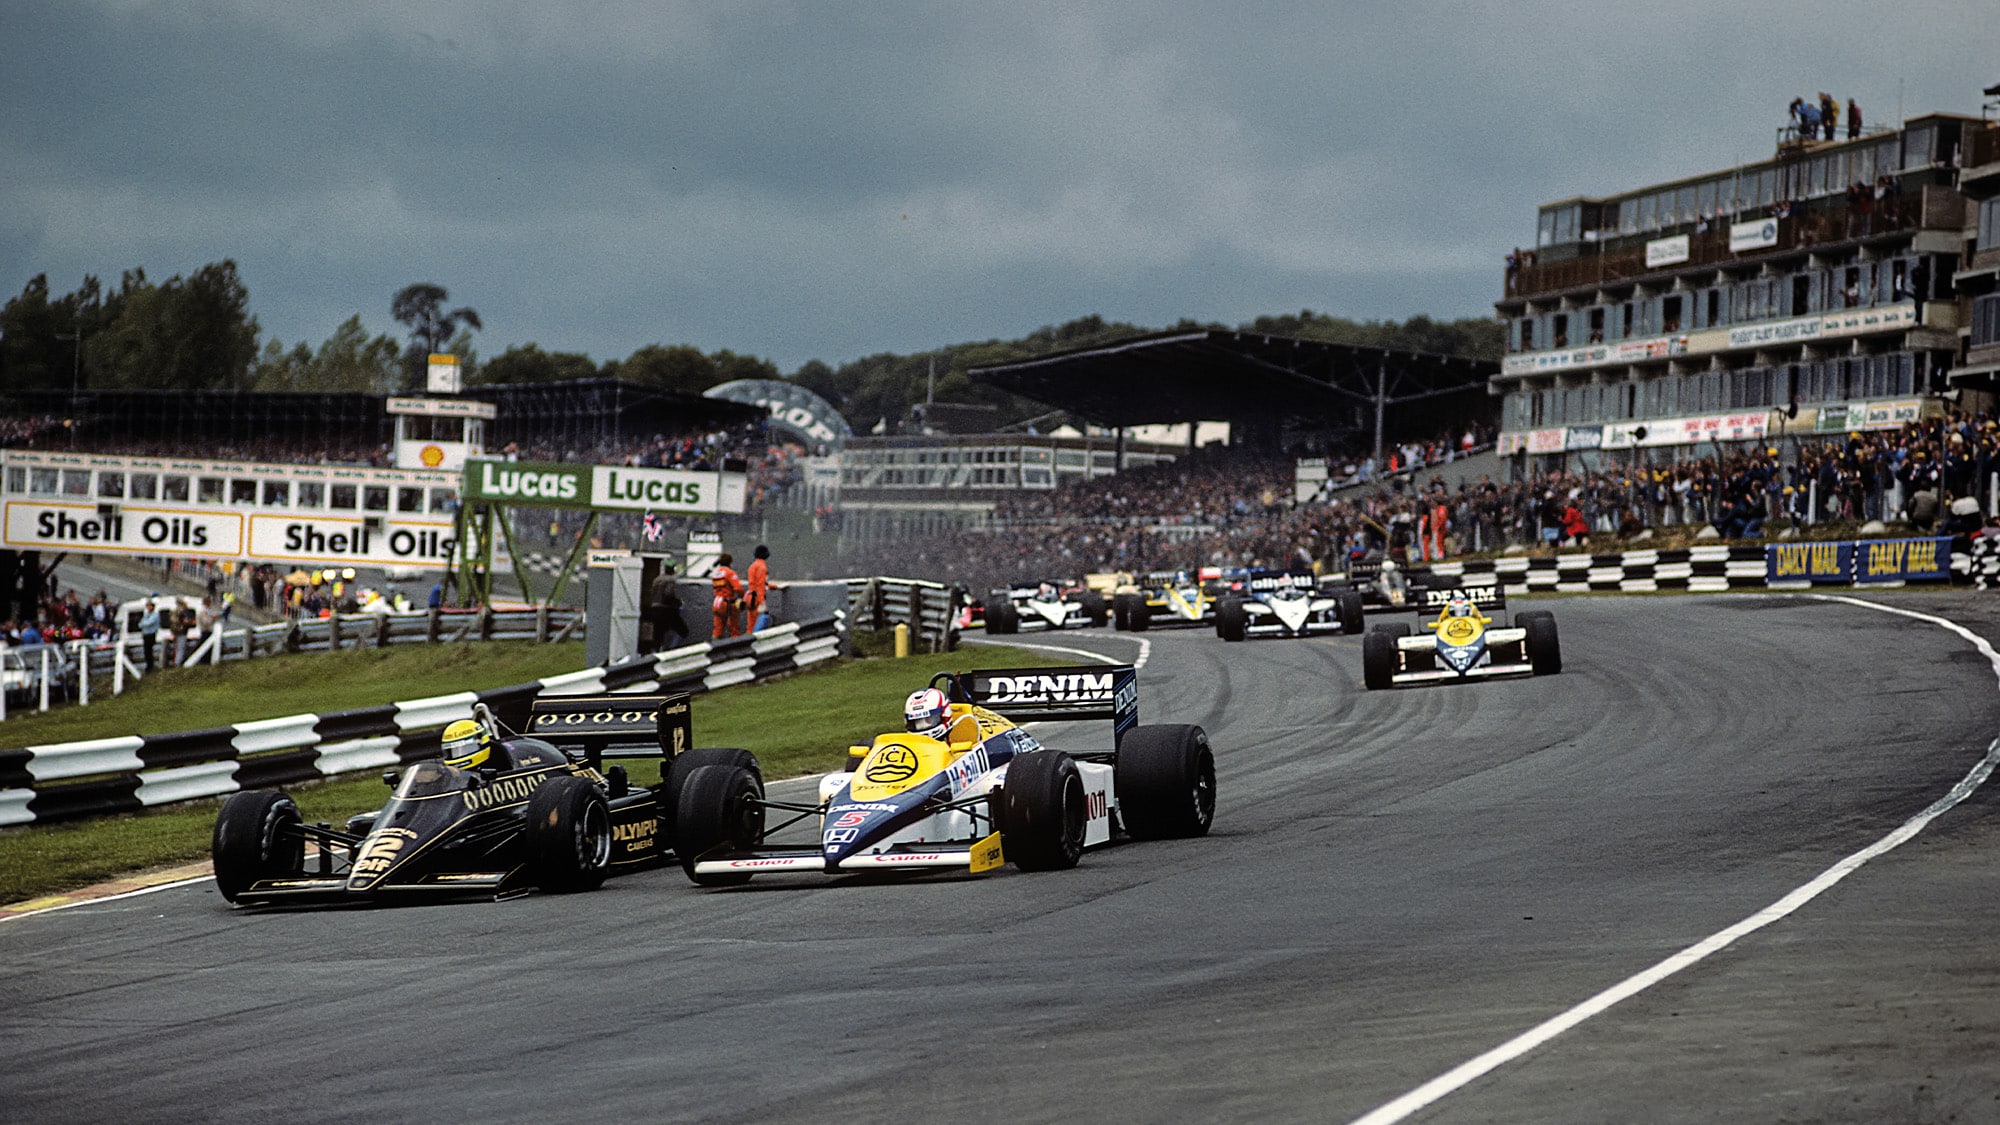 Nigel Mansell battles with Ayrton Senna on his way to victory at the 1985 British Grand Prix at Brands Hatch